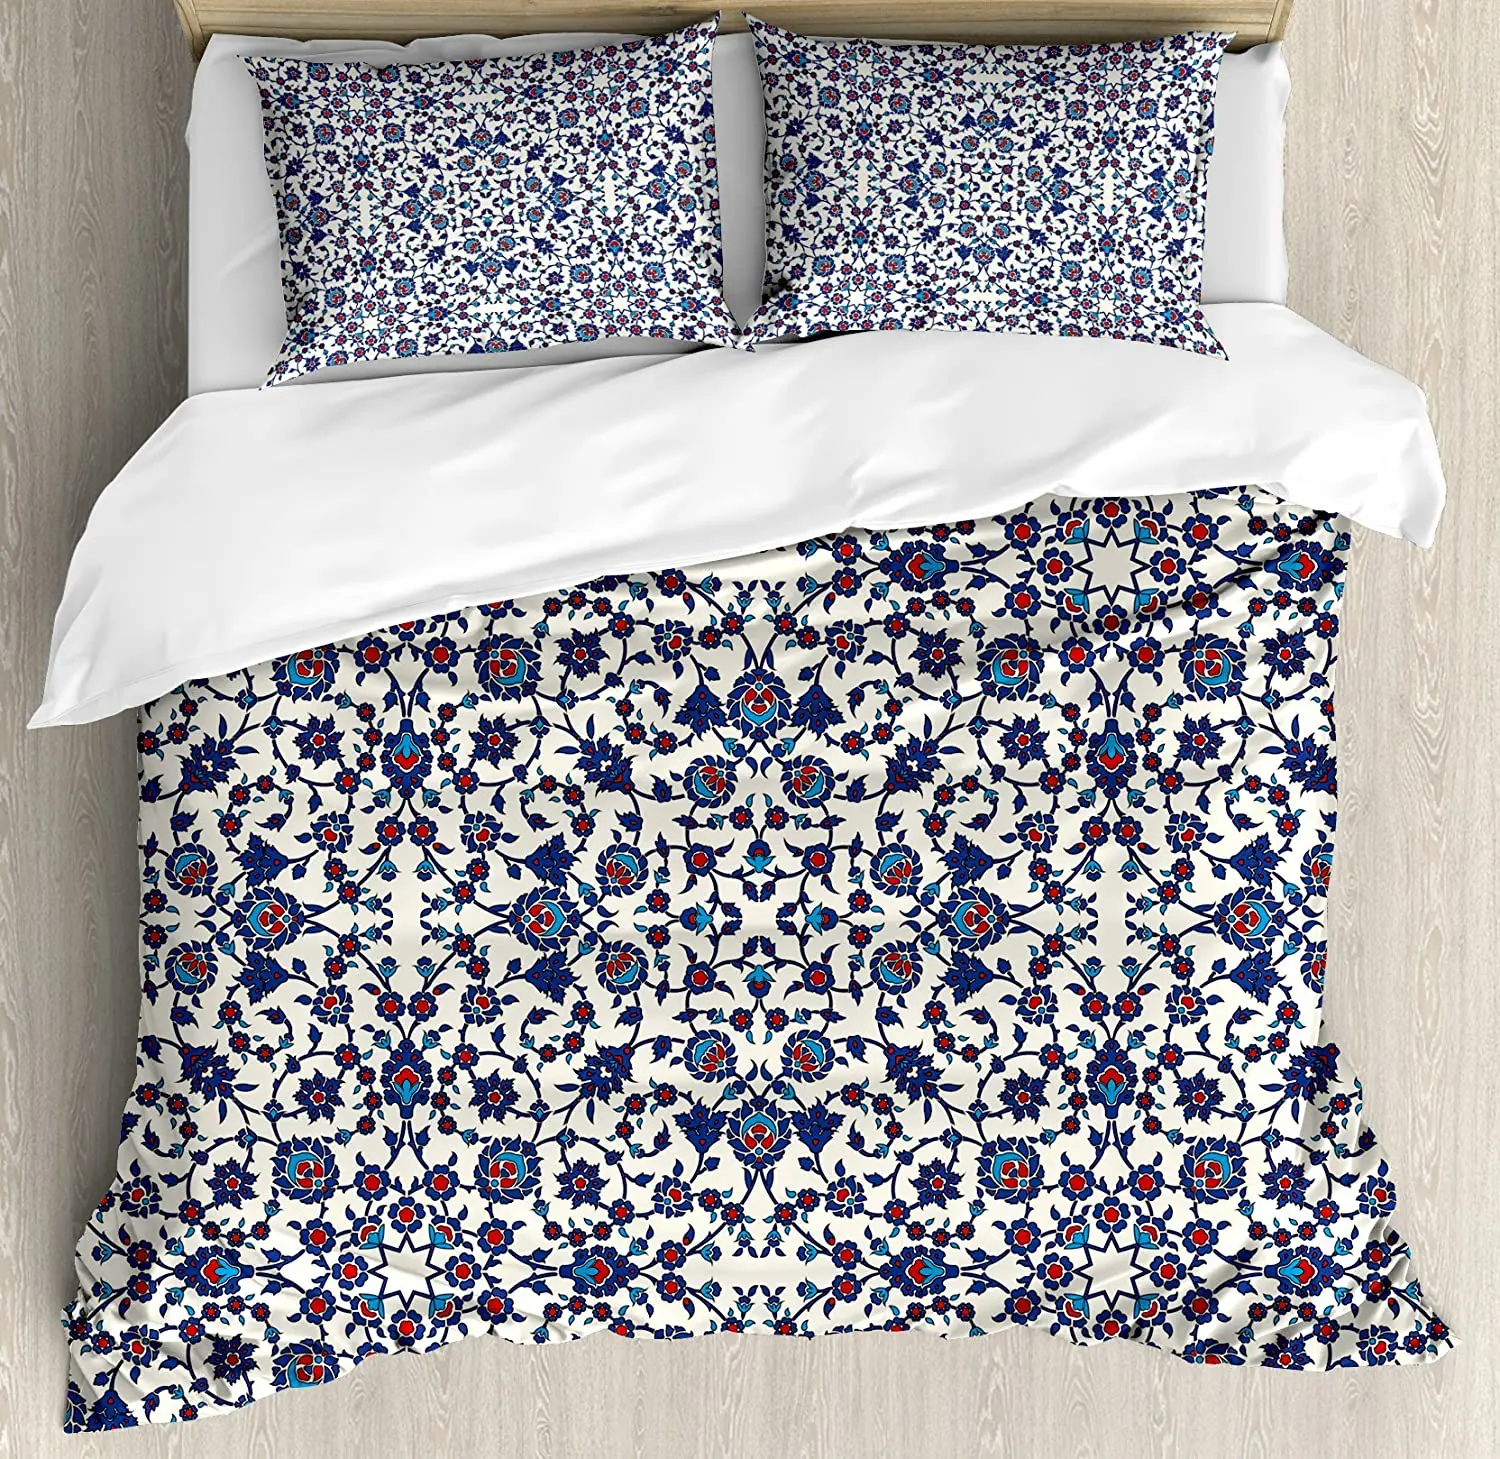 

Arabesque Bedding Set For Home Double Bed Moroccan Floral Pattern with Victorian Rococo Baroque Oriental Design Duvet Cover Set